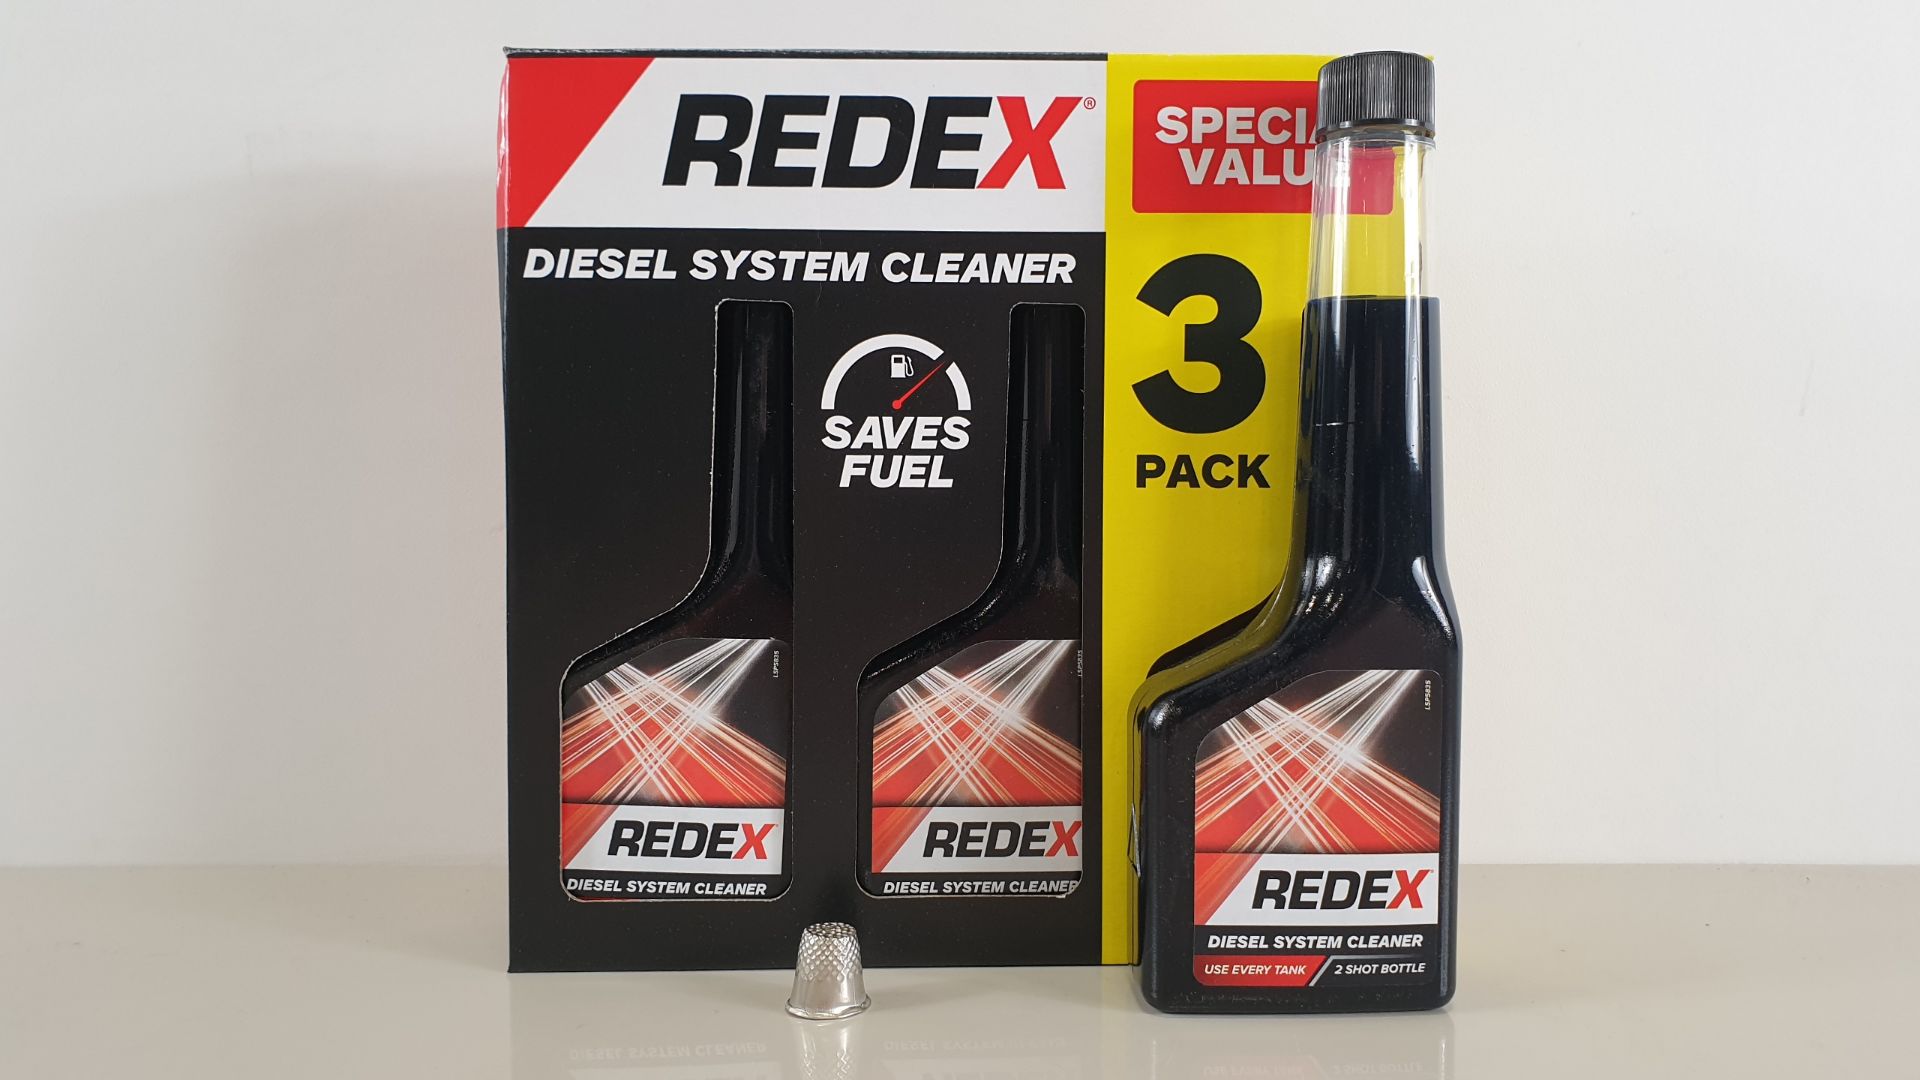 18 X PACKS OF 3 250 ML REDEX DIESEL SYSTEM CLEANER - IN 3 CARTONS (RADD0007A)